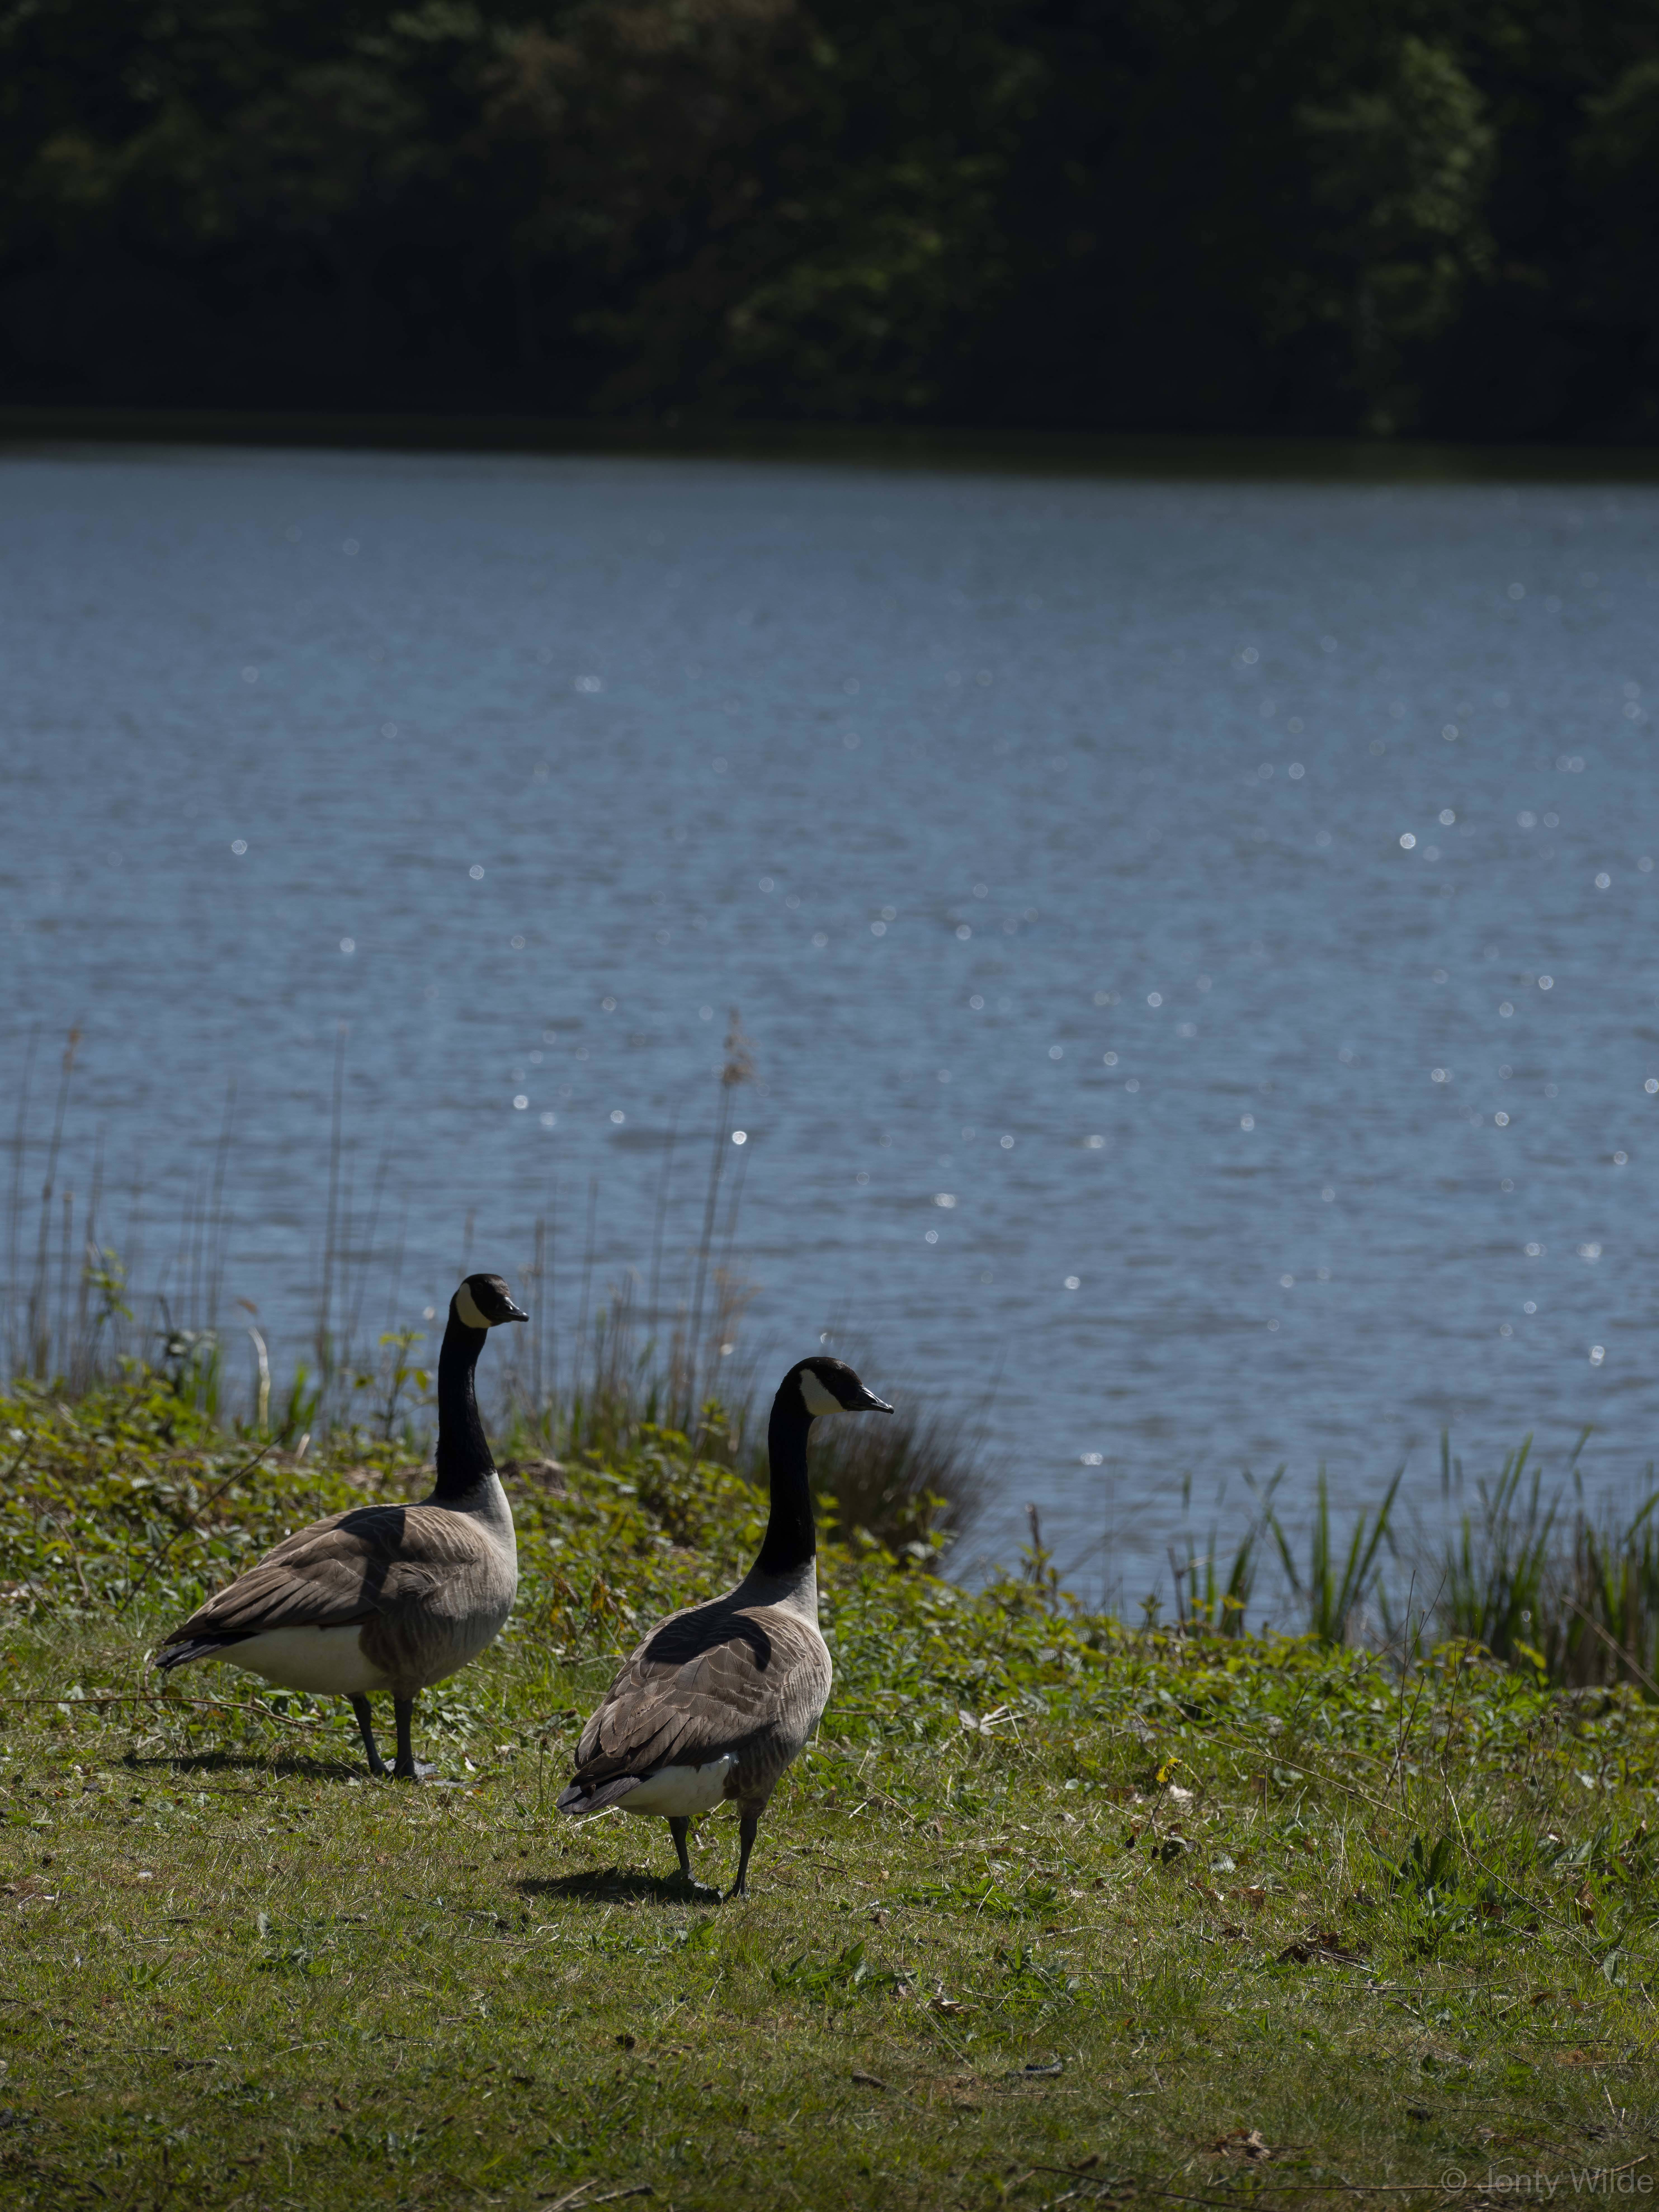 Two Canada geese standing next to a lake